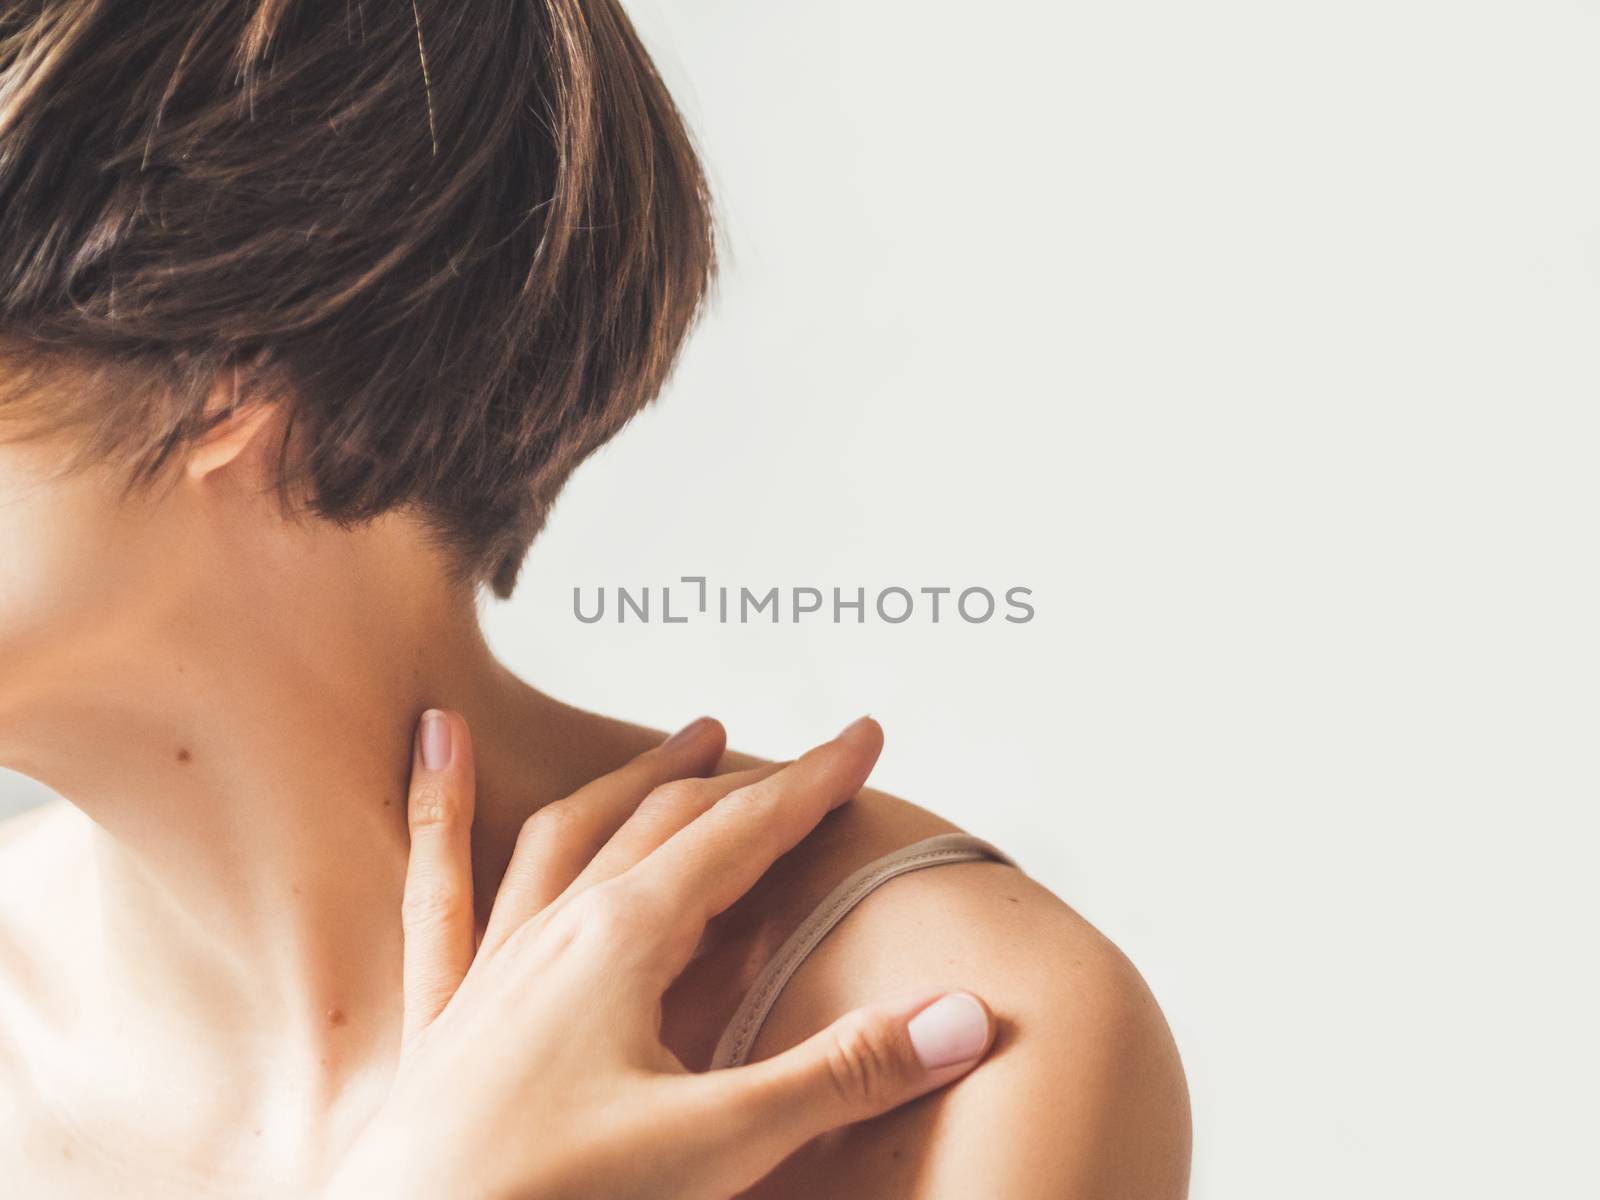 Close up portrait of woman with short hair cut on white background. Natural beauty without make up.